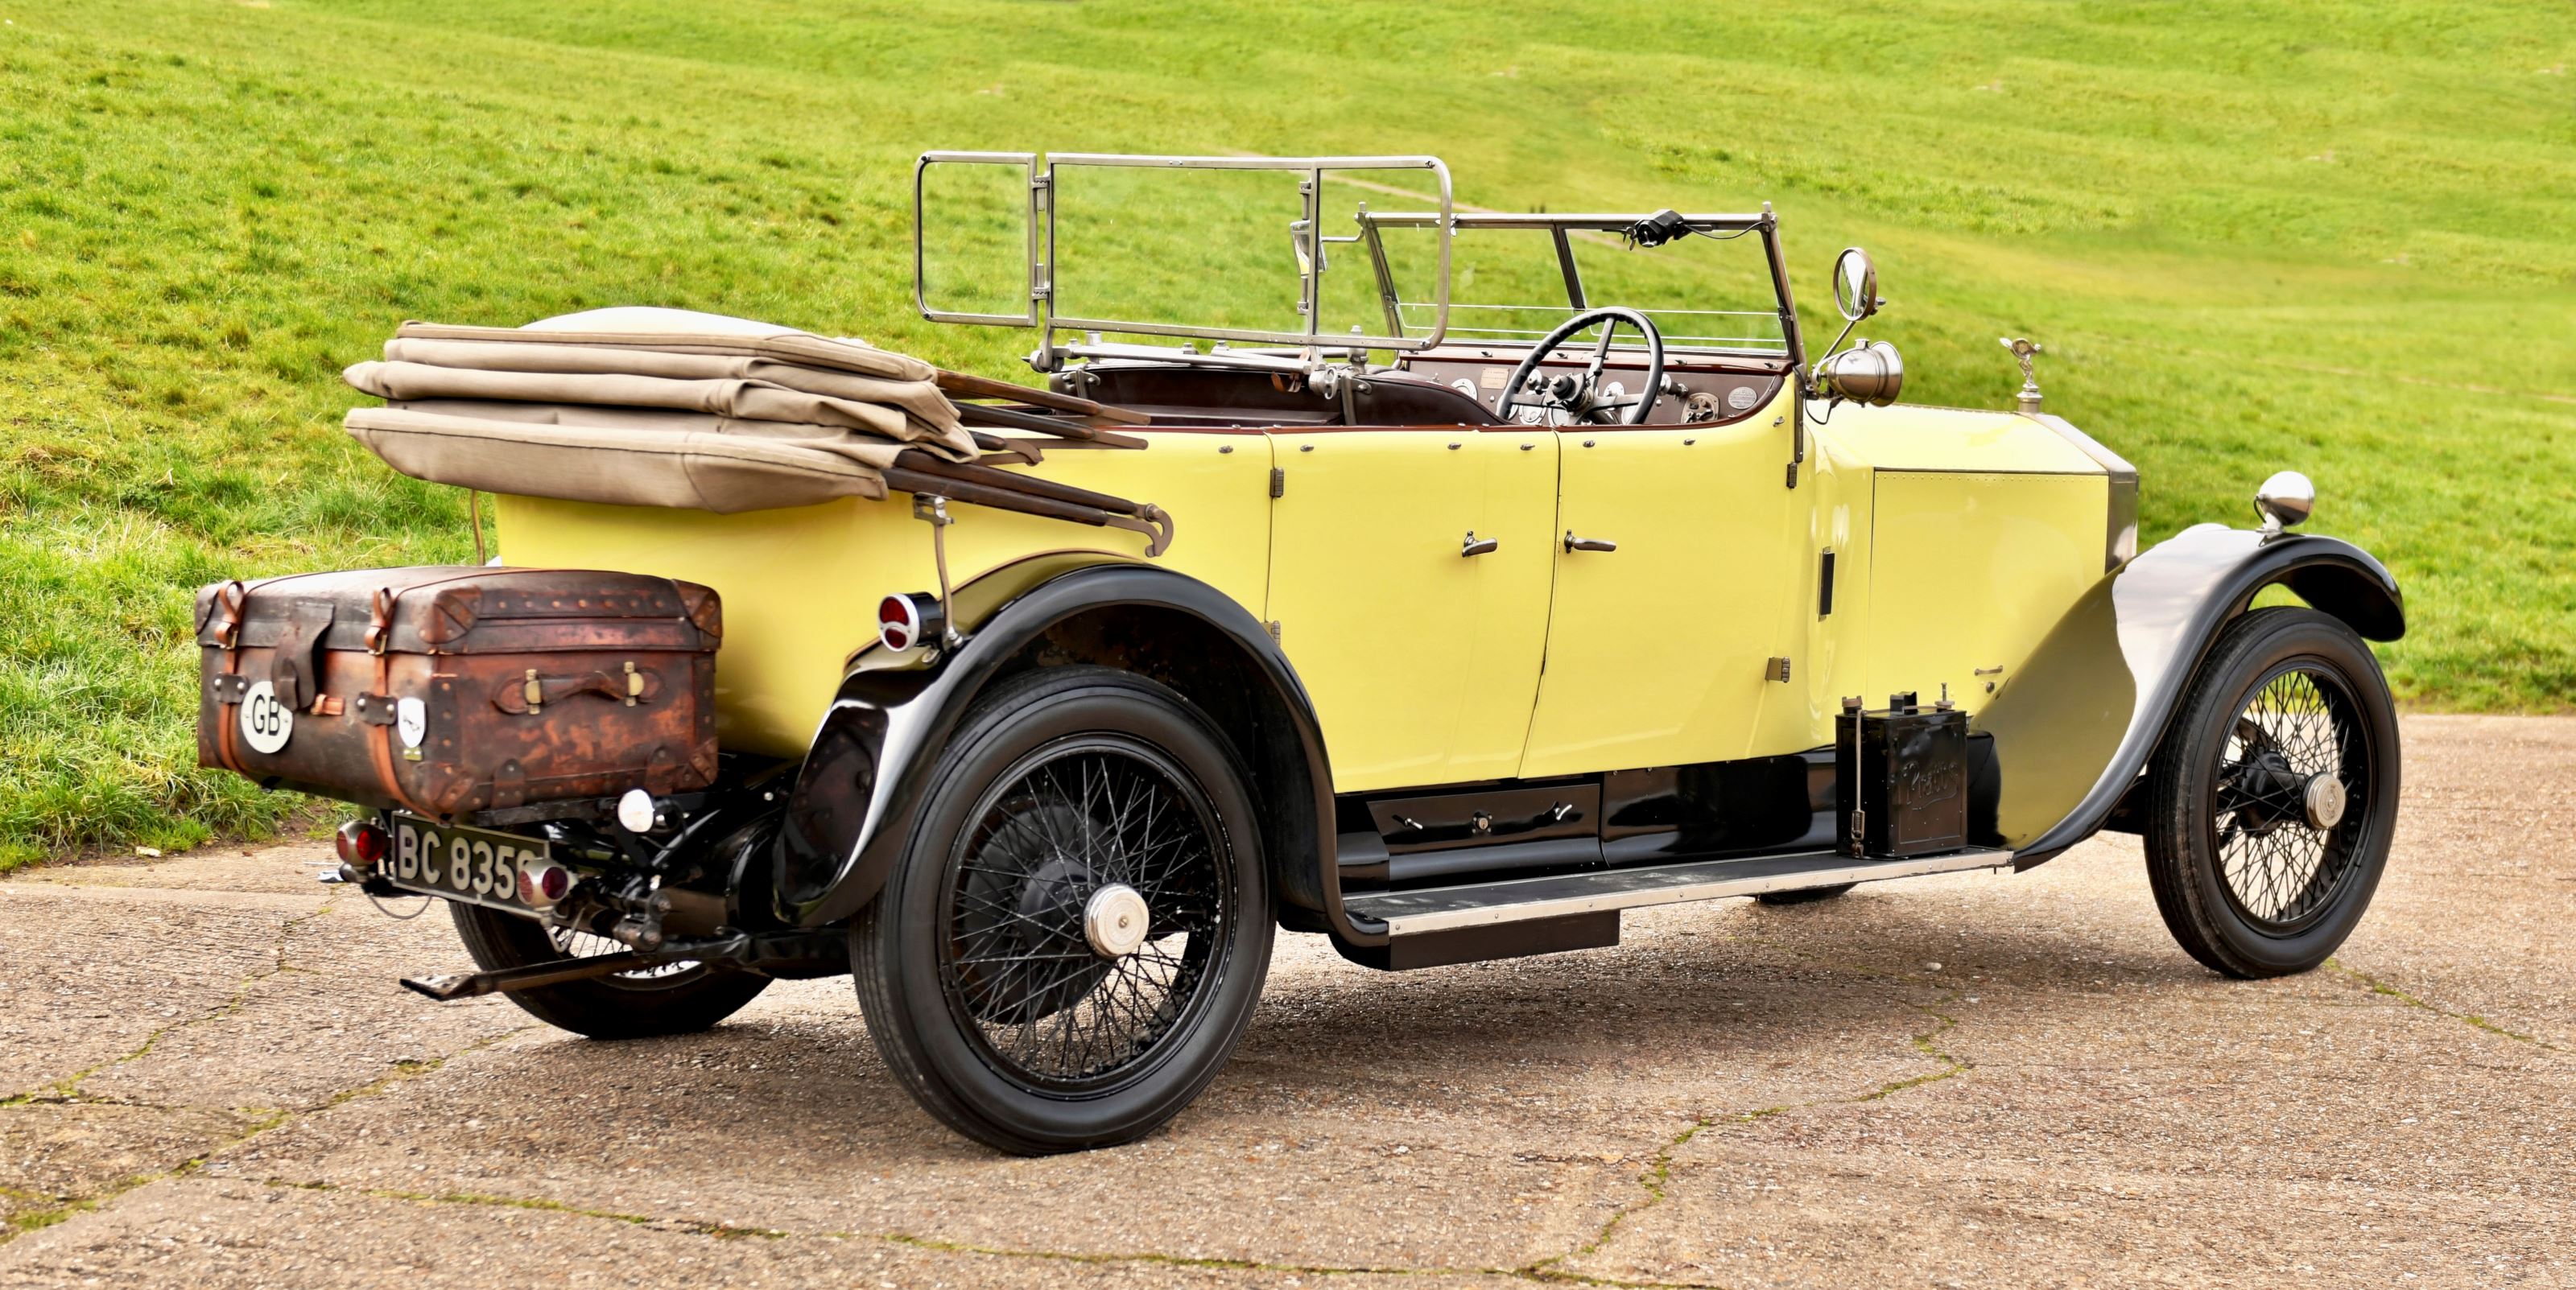 Rolls royce 20hp tourer by hamshaws of leicester xz8trchgqw7sibrckont0